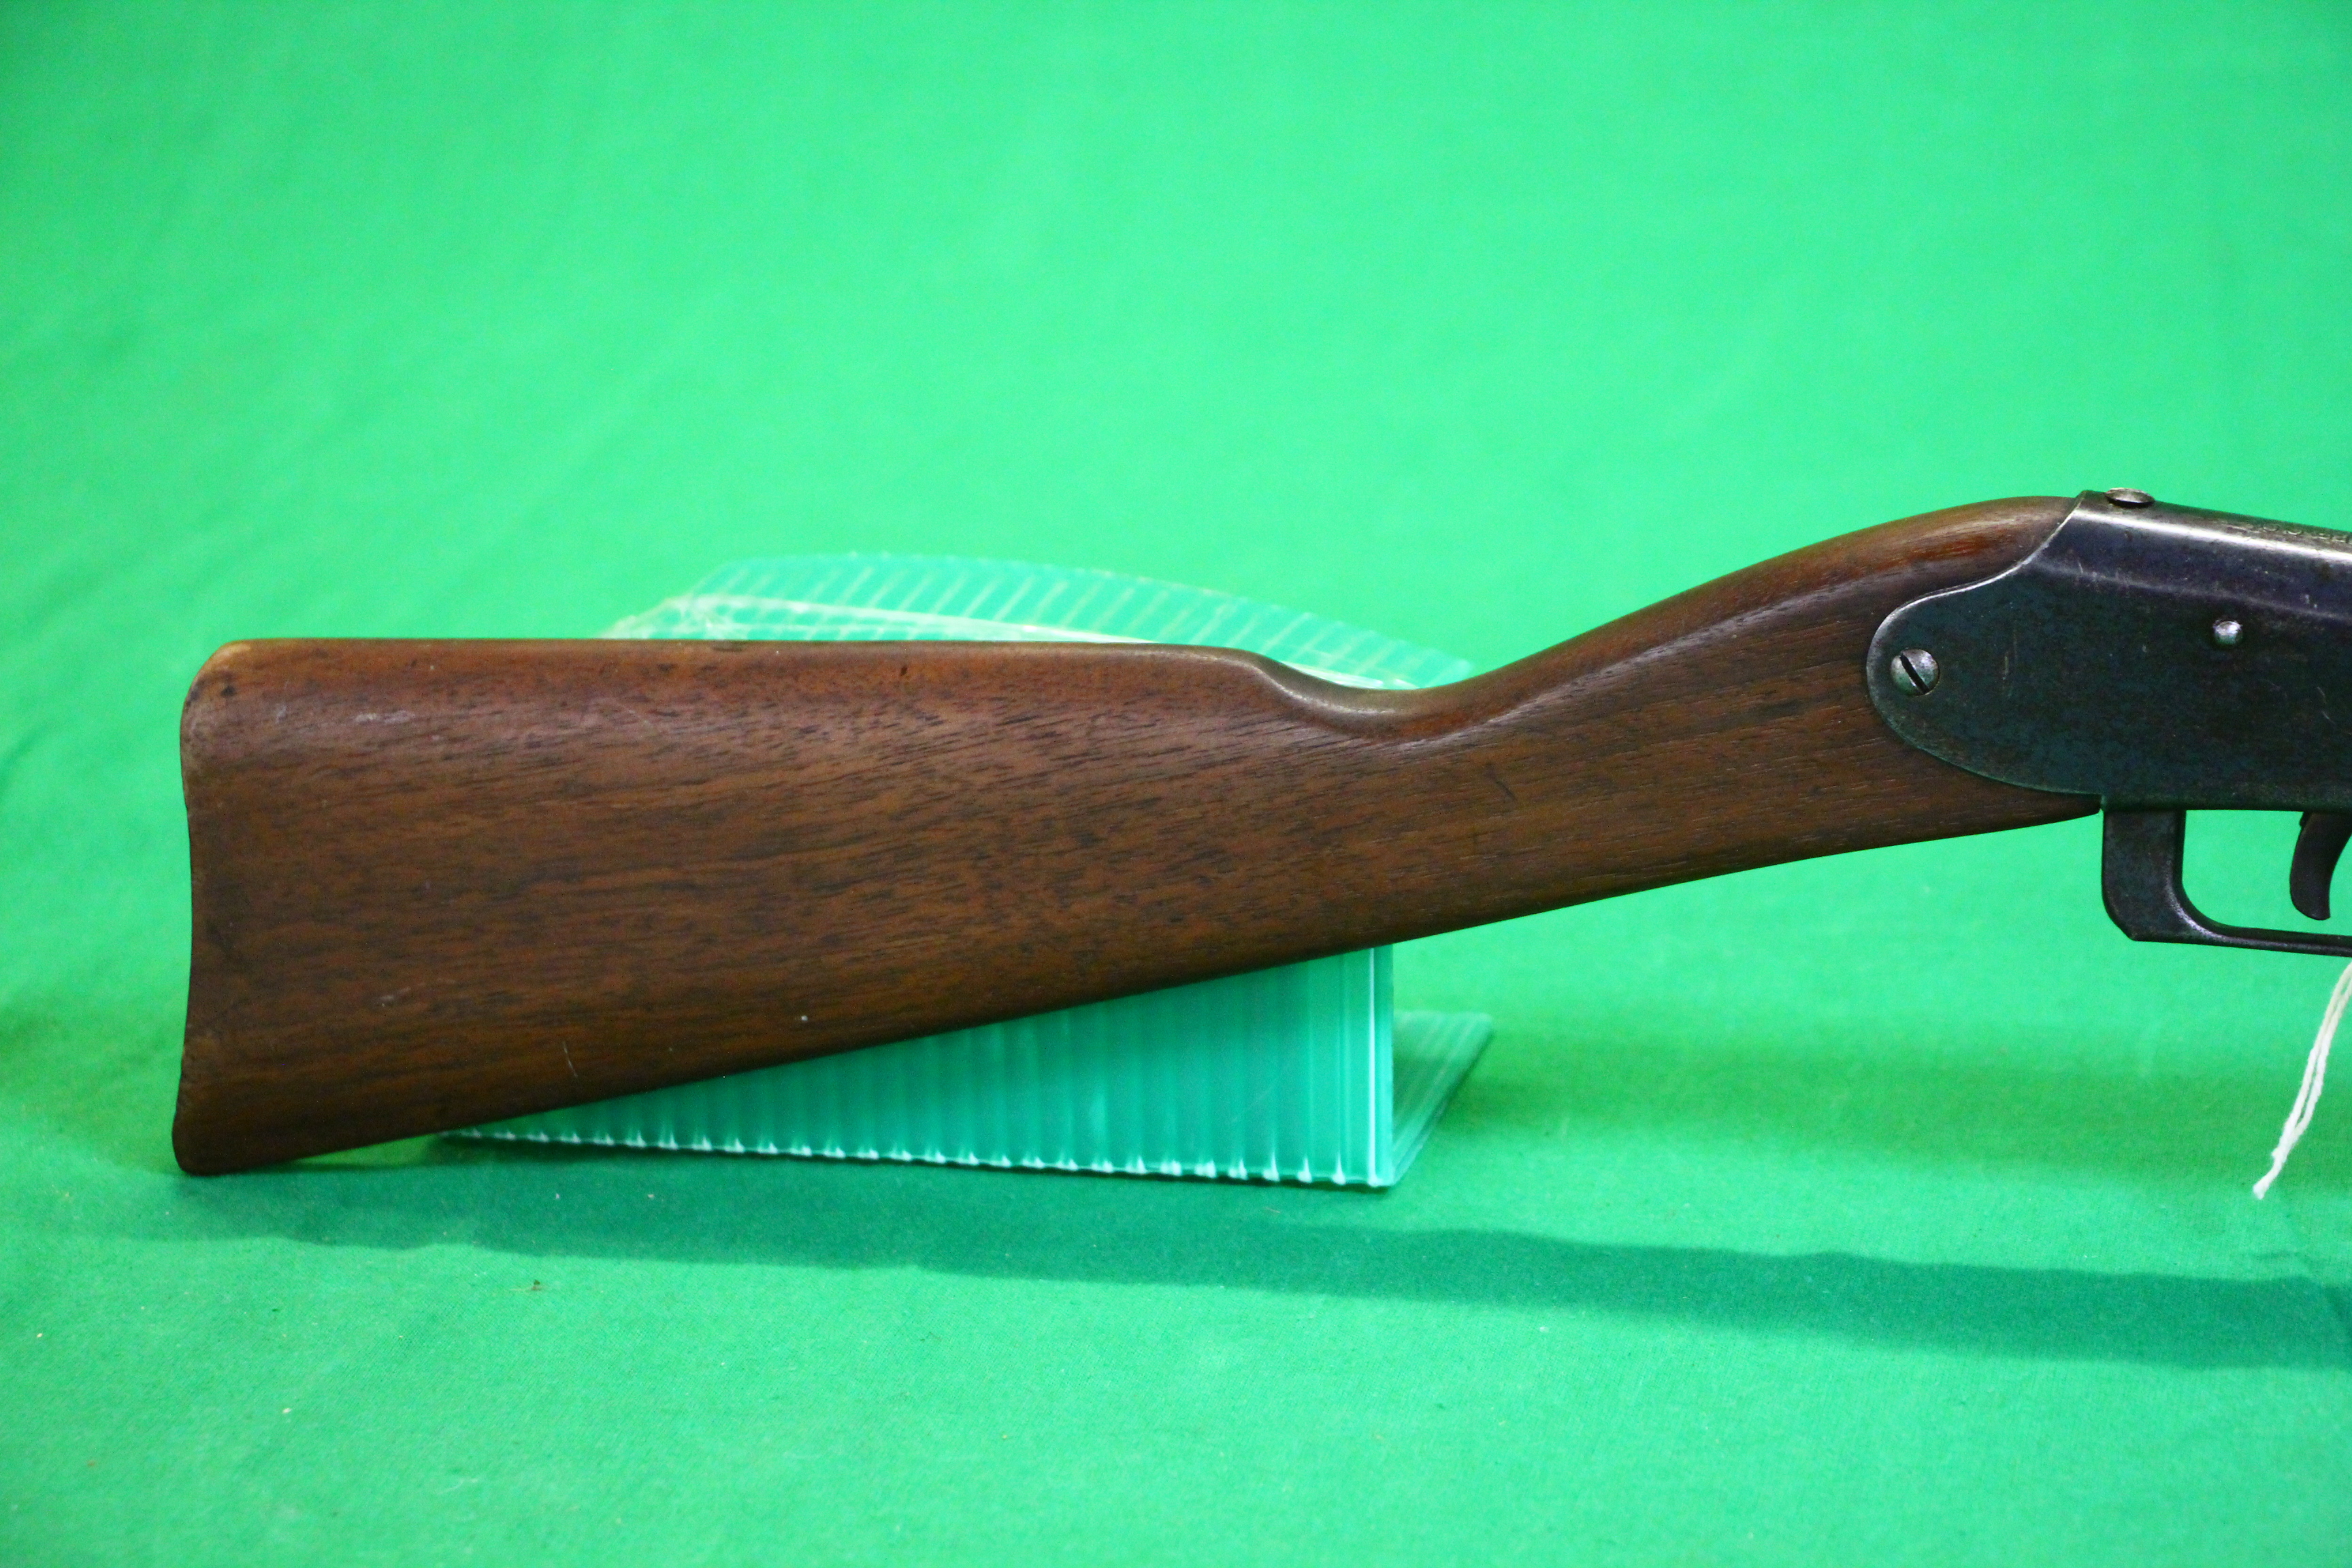 A DAISY MODEL 25 PUMP ACTION AIR GUN - (ALL GUNS TO BE INSPECTED AND SERVICED BY QUALIFIED GUNSMITH - Image 4 of 8